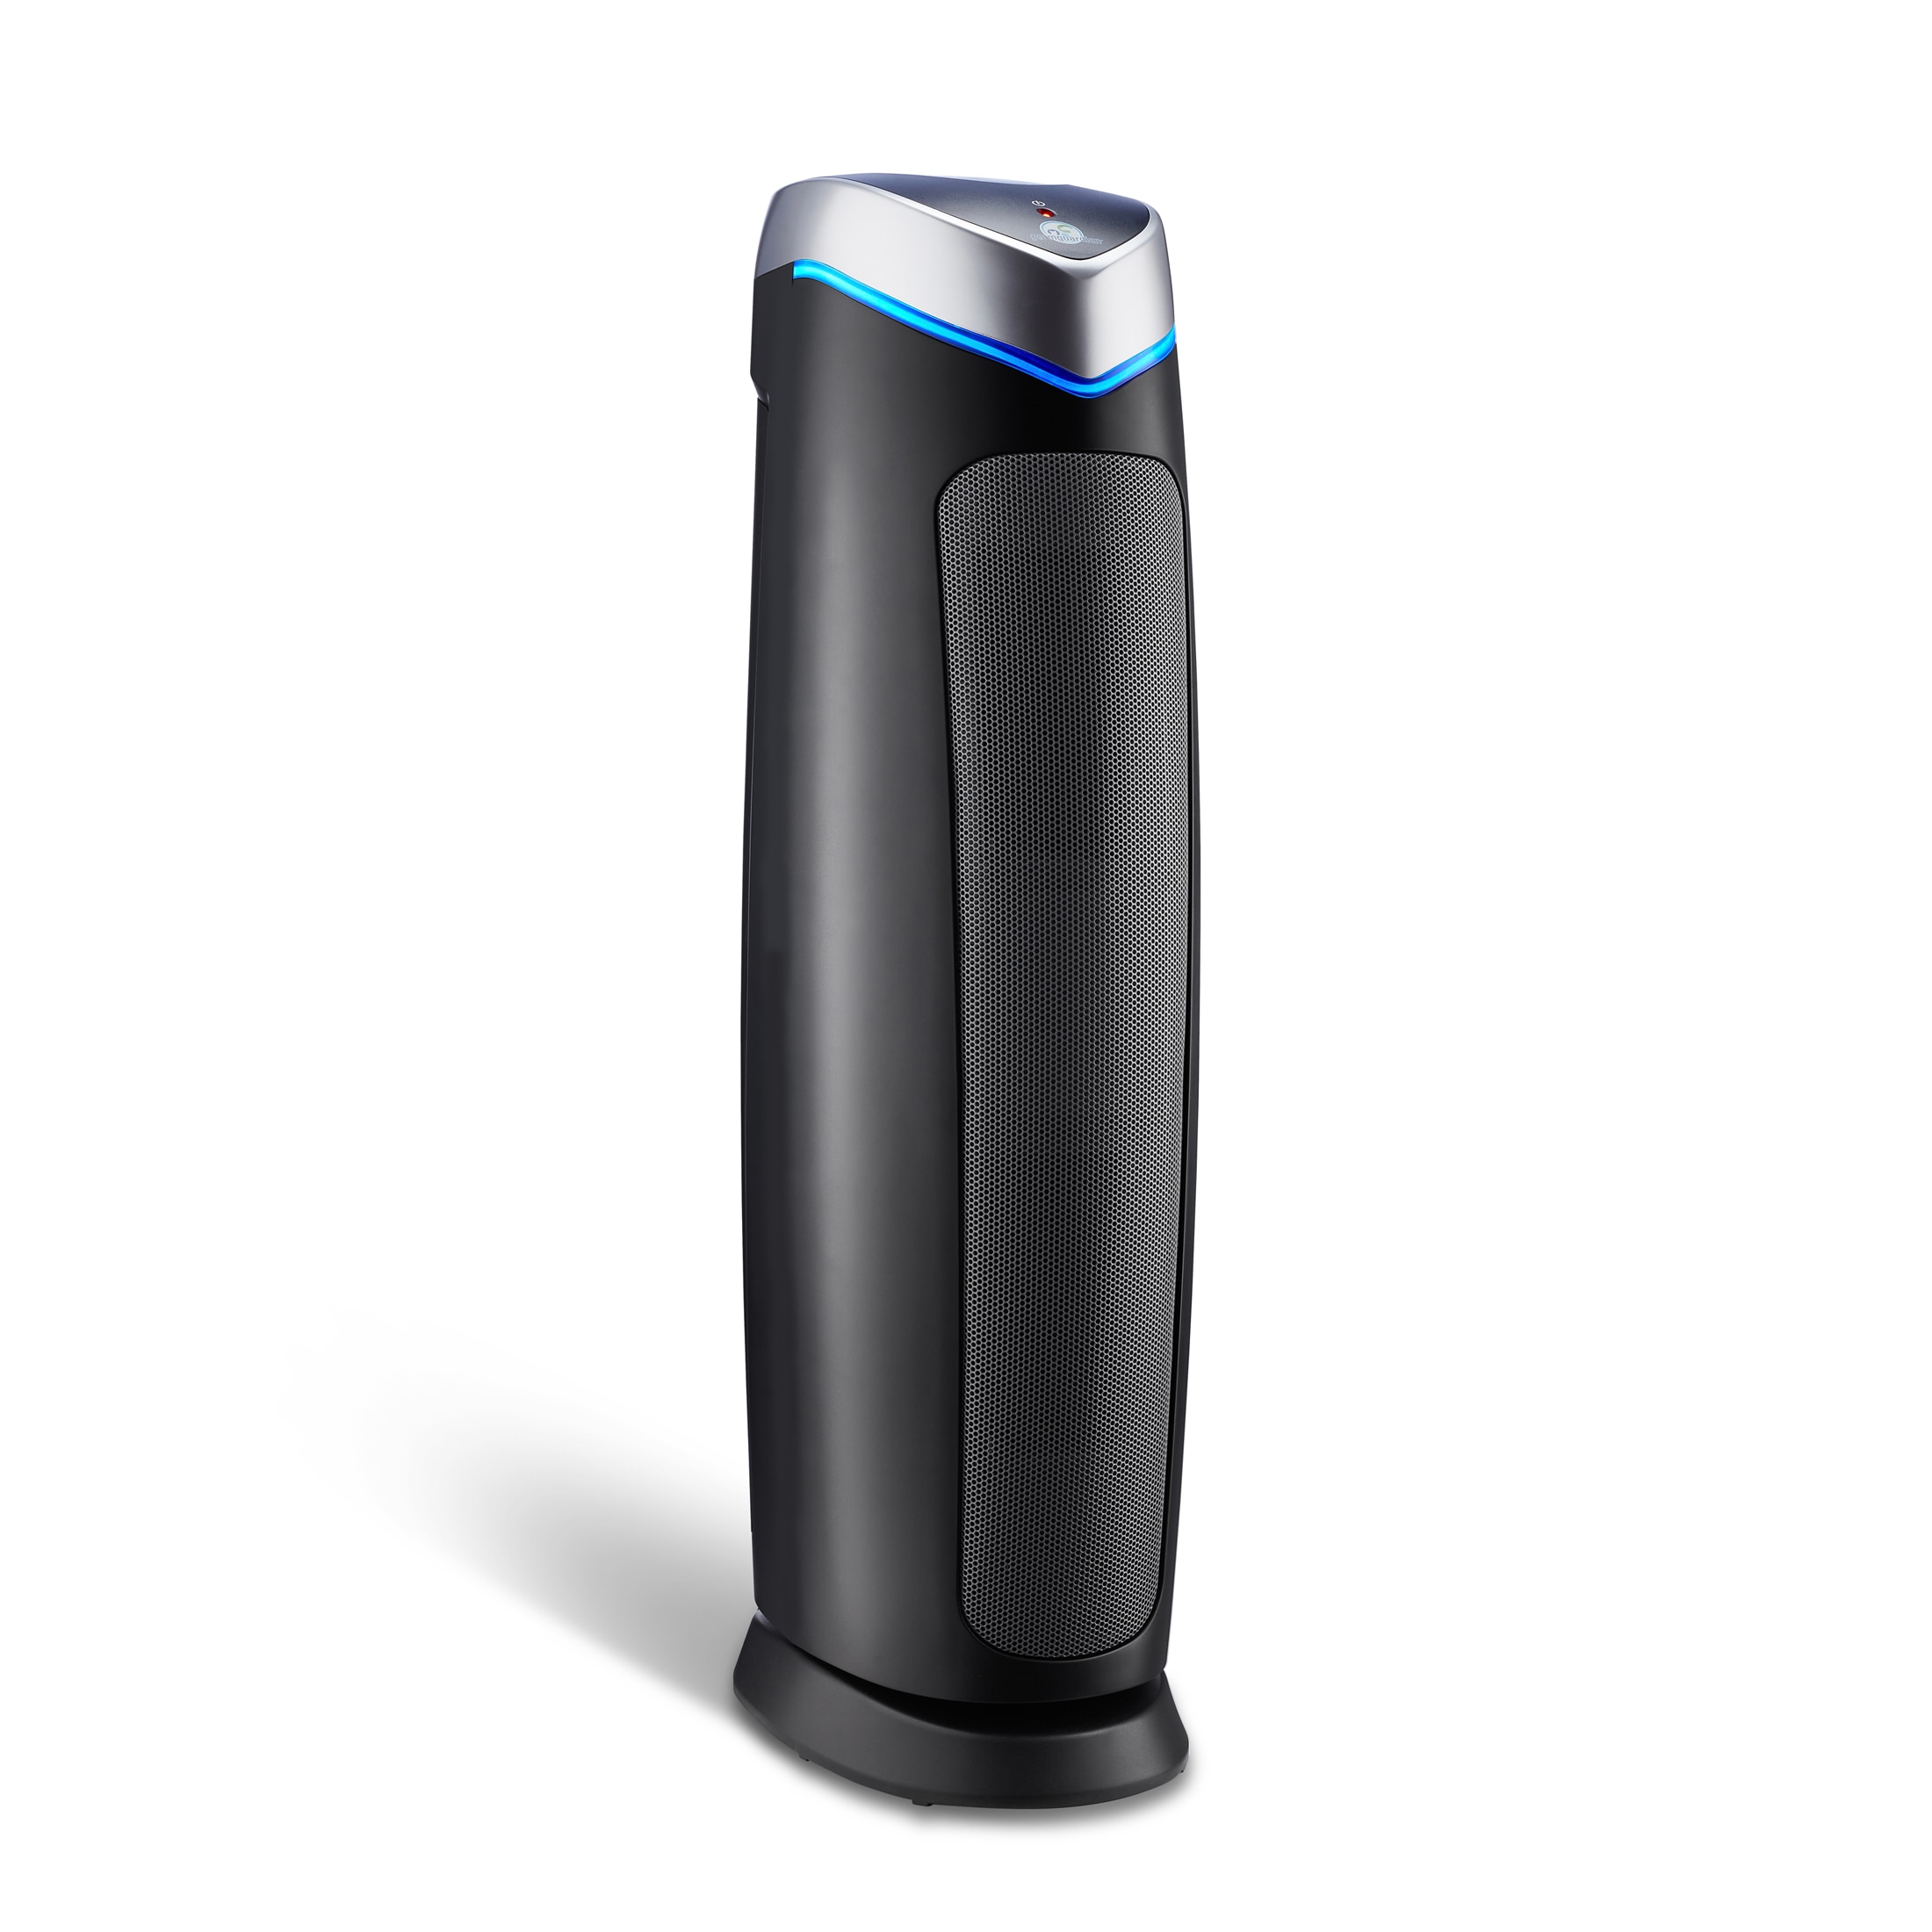 1 UV Light Installation & Air Purifiers in Upper Marlboro, MD With Over 250  Local 5-Star Reviews